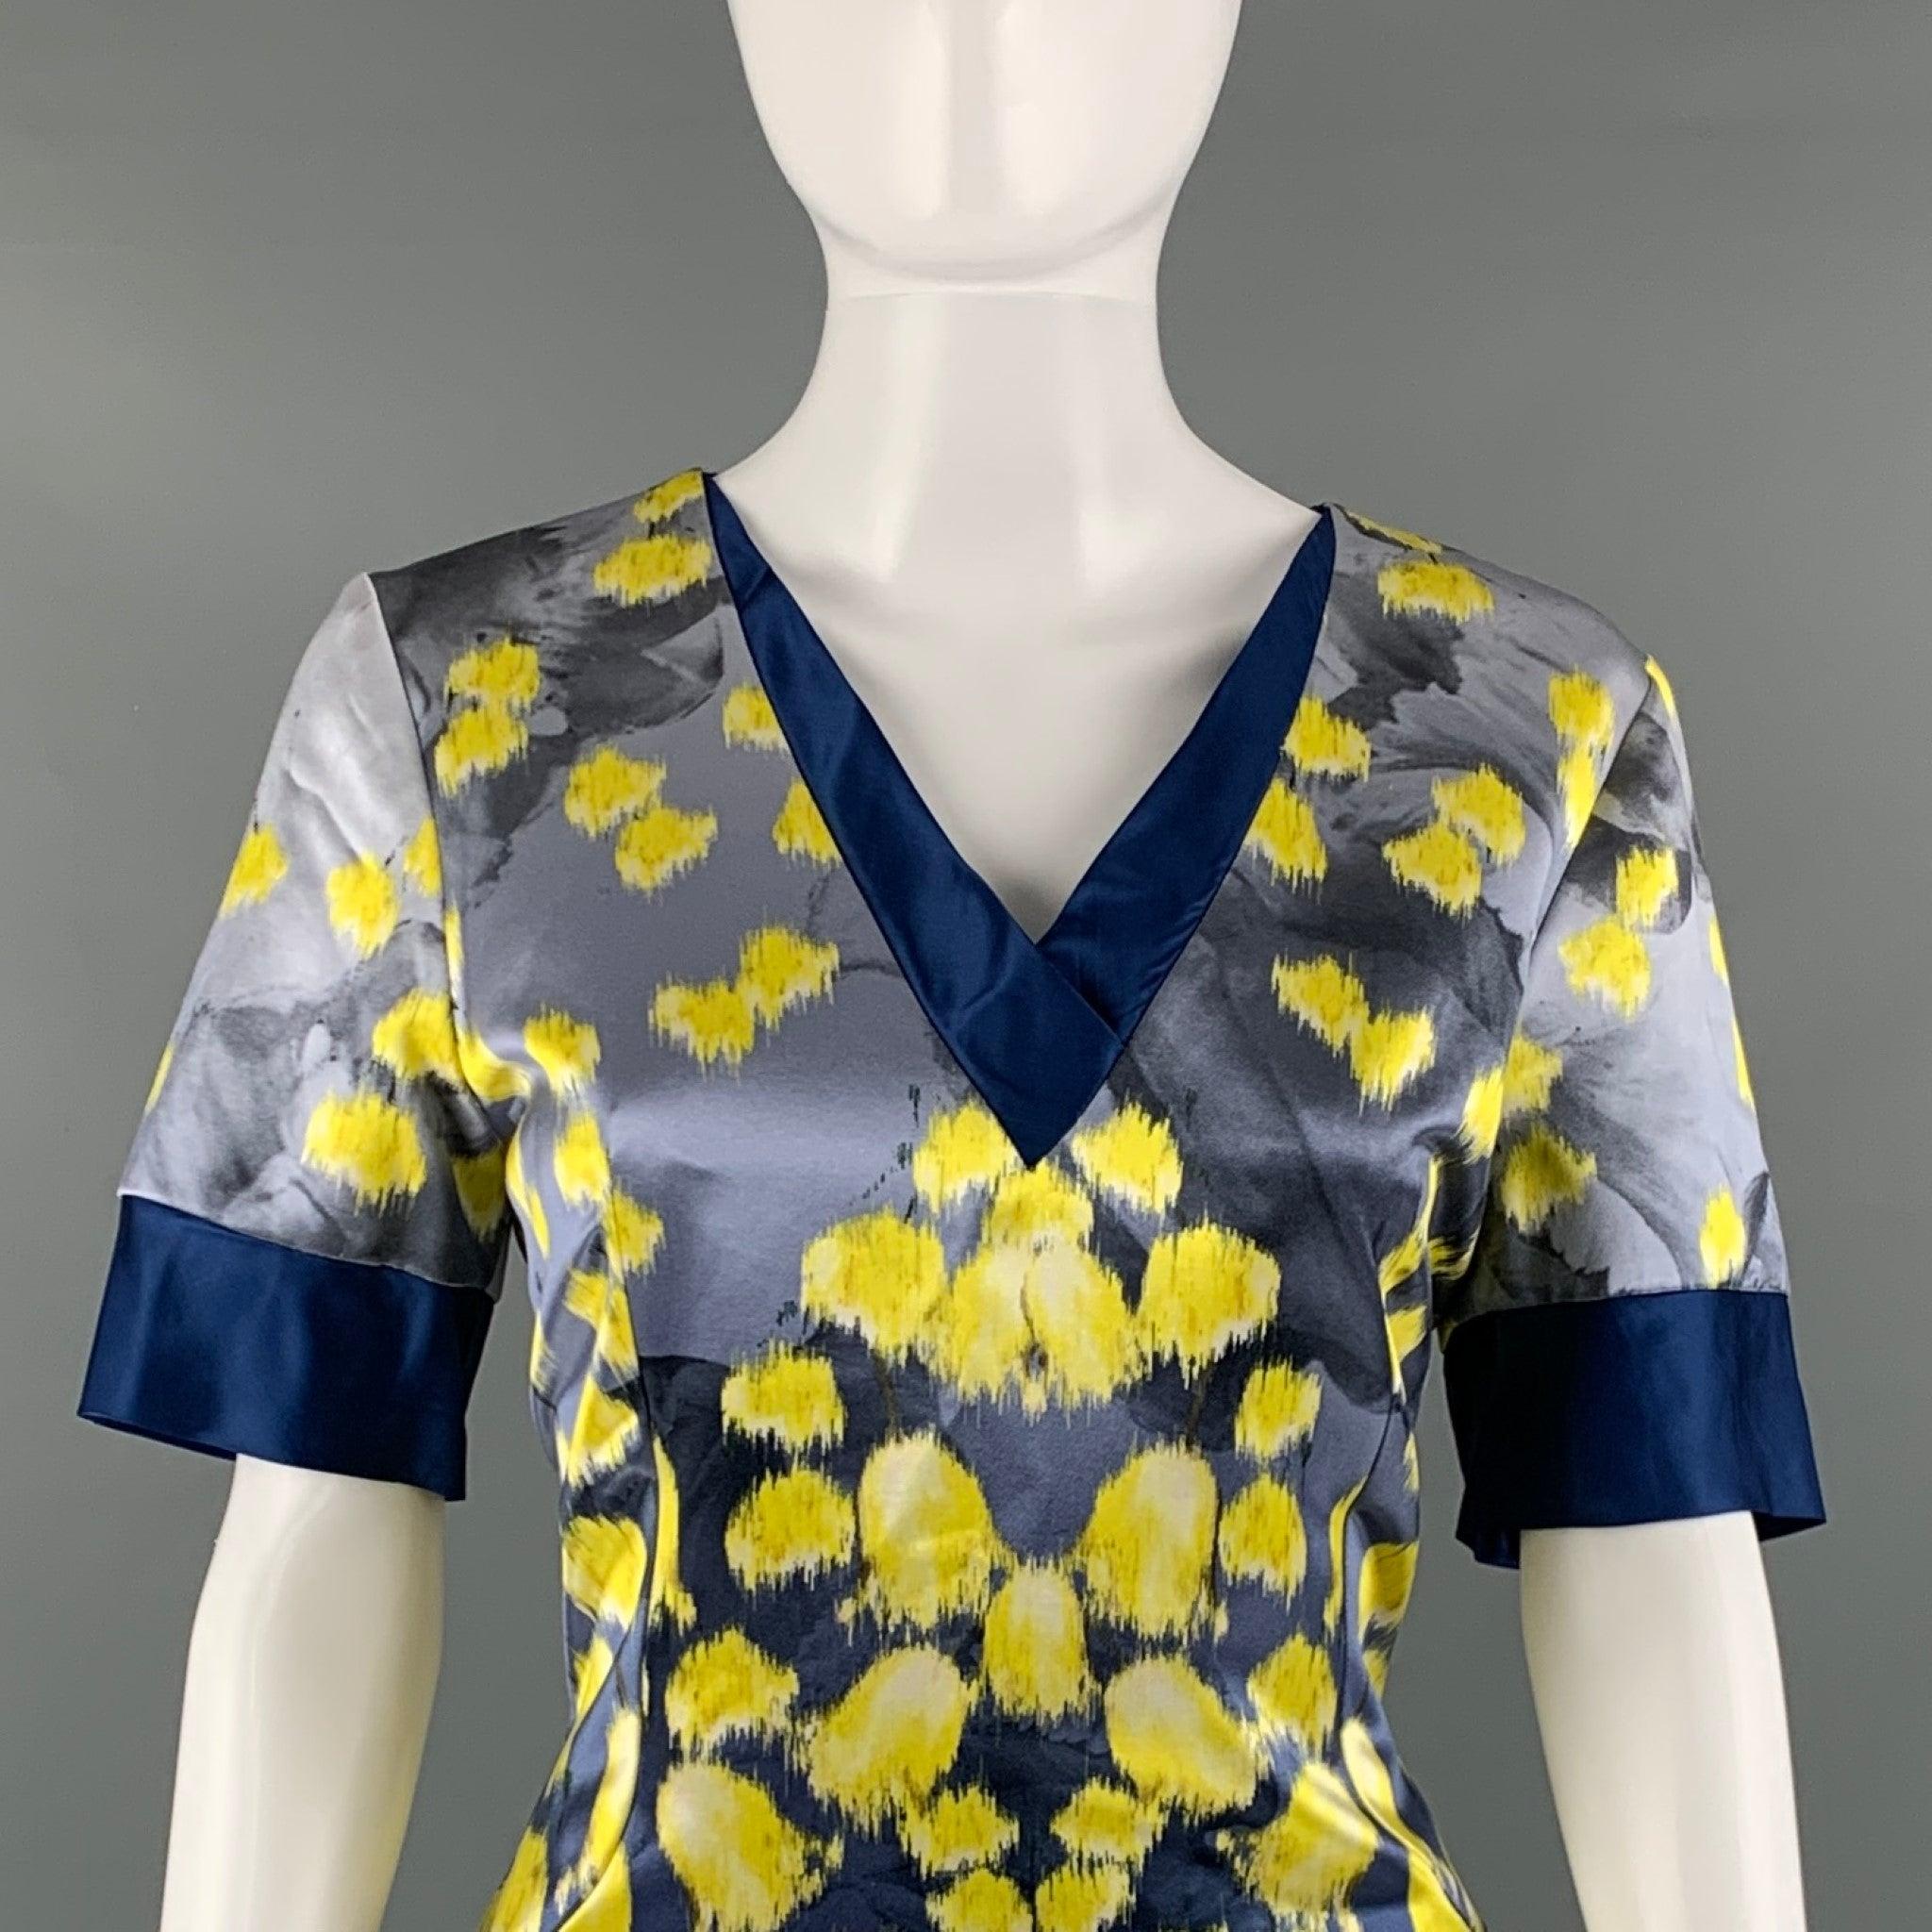 PRABAL GURUNG bellow knee dress comes in a blue and yellow abstract printed cotton and silk woven material featuring an A-line style, short sleeves, v-neck, and a back zip up closure. Made in New York City.Excellentd Pre-Owned Condition. 

Marked: 